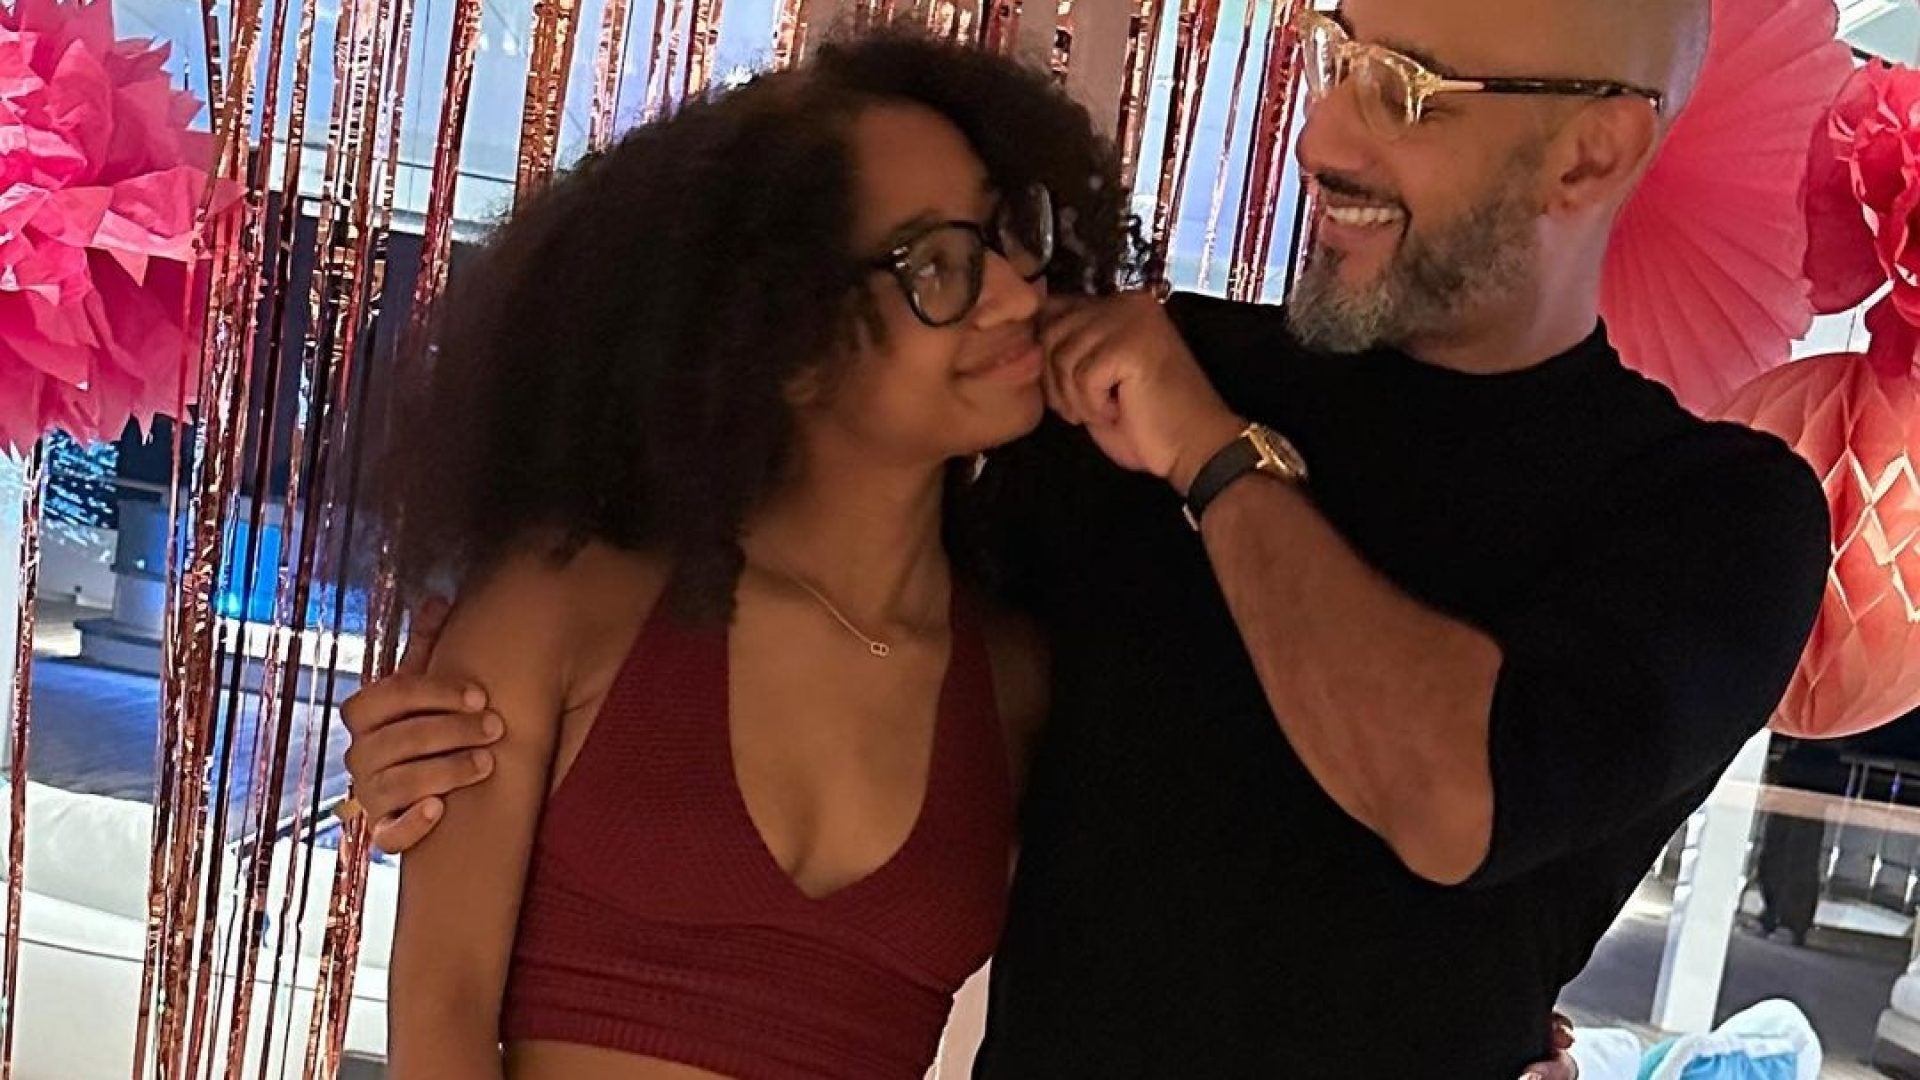 Swizz Beatz’s Daughter, Nicole, Celebrated Her 16th Birthday Lavishly With A Private Jet